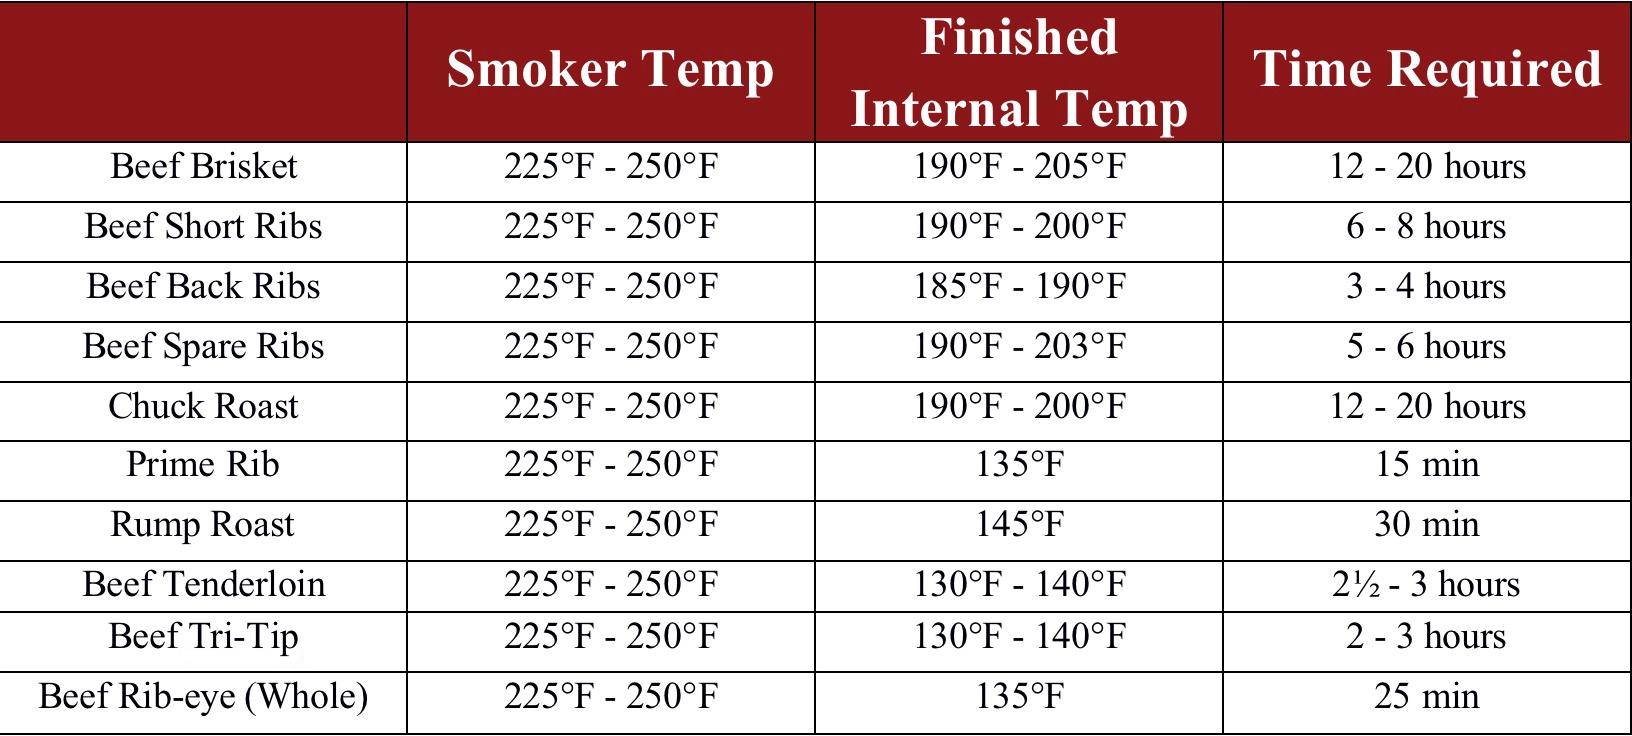 smoked meat temperature chart - Is 200 degrees good for smoking meat